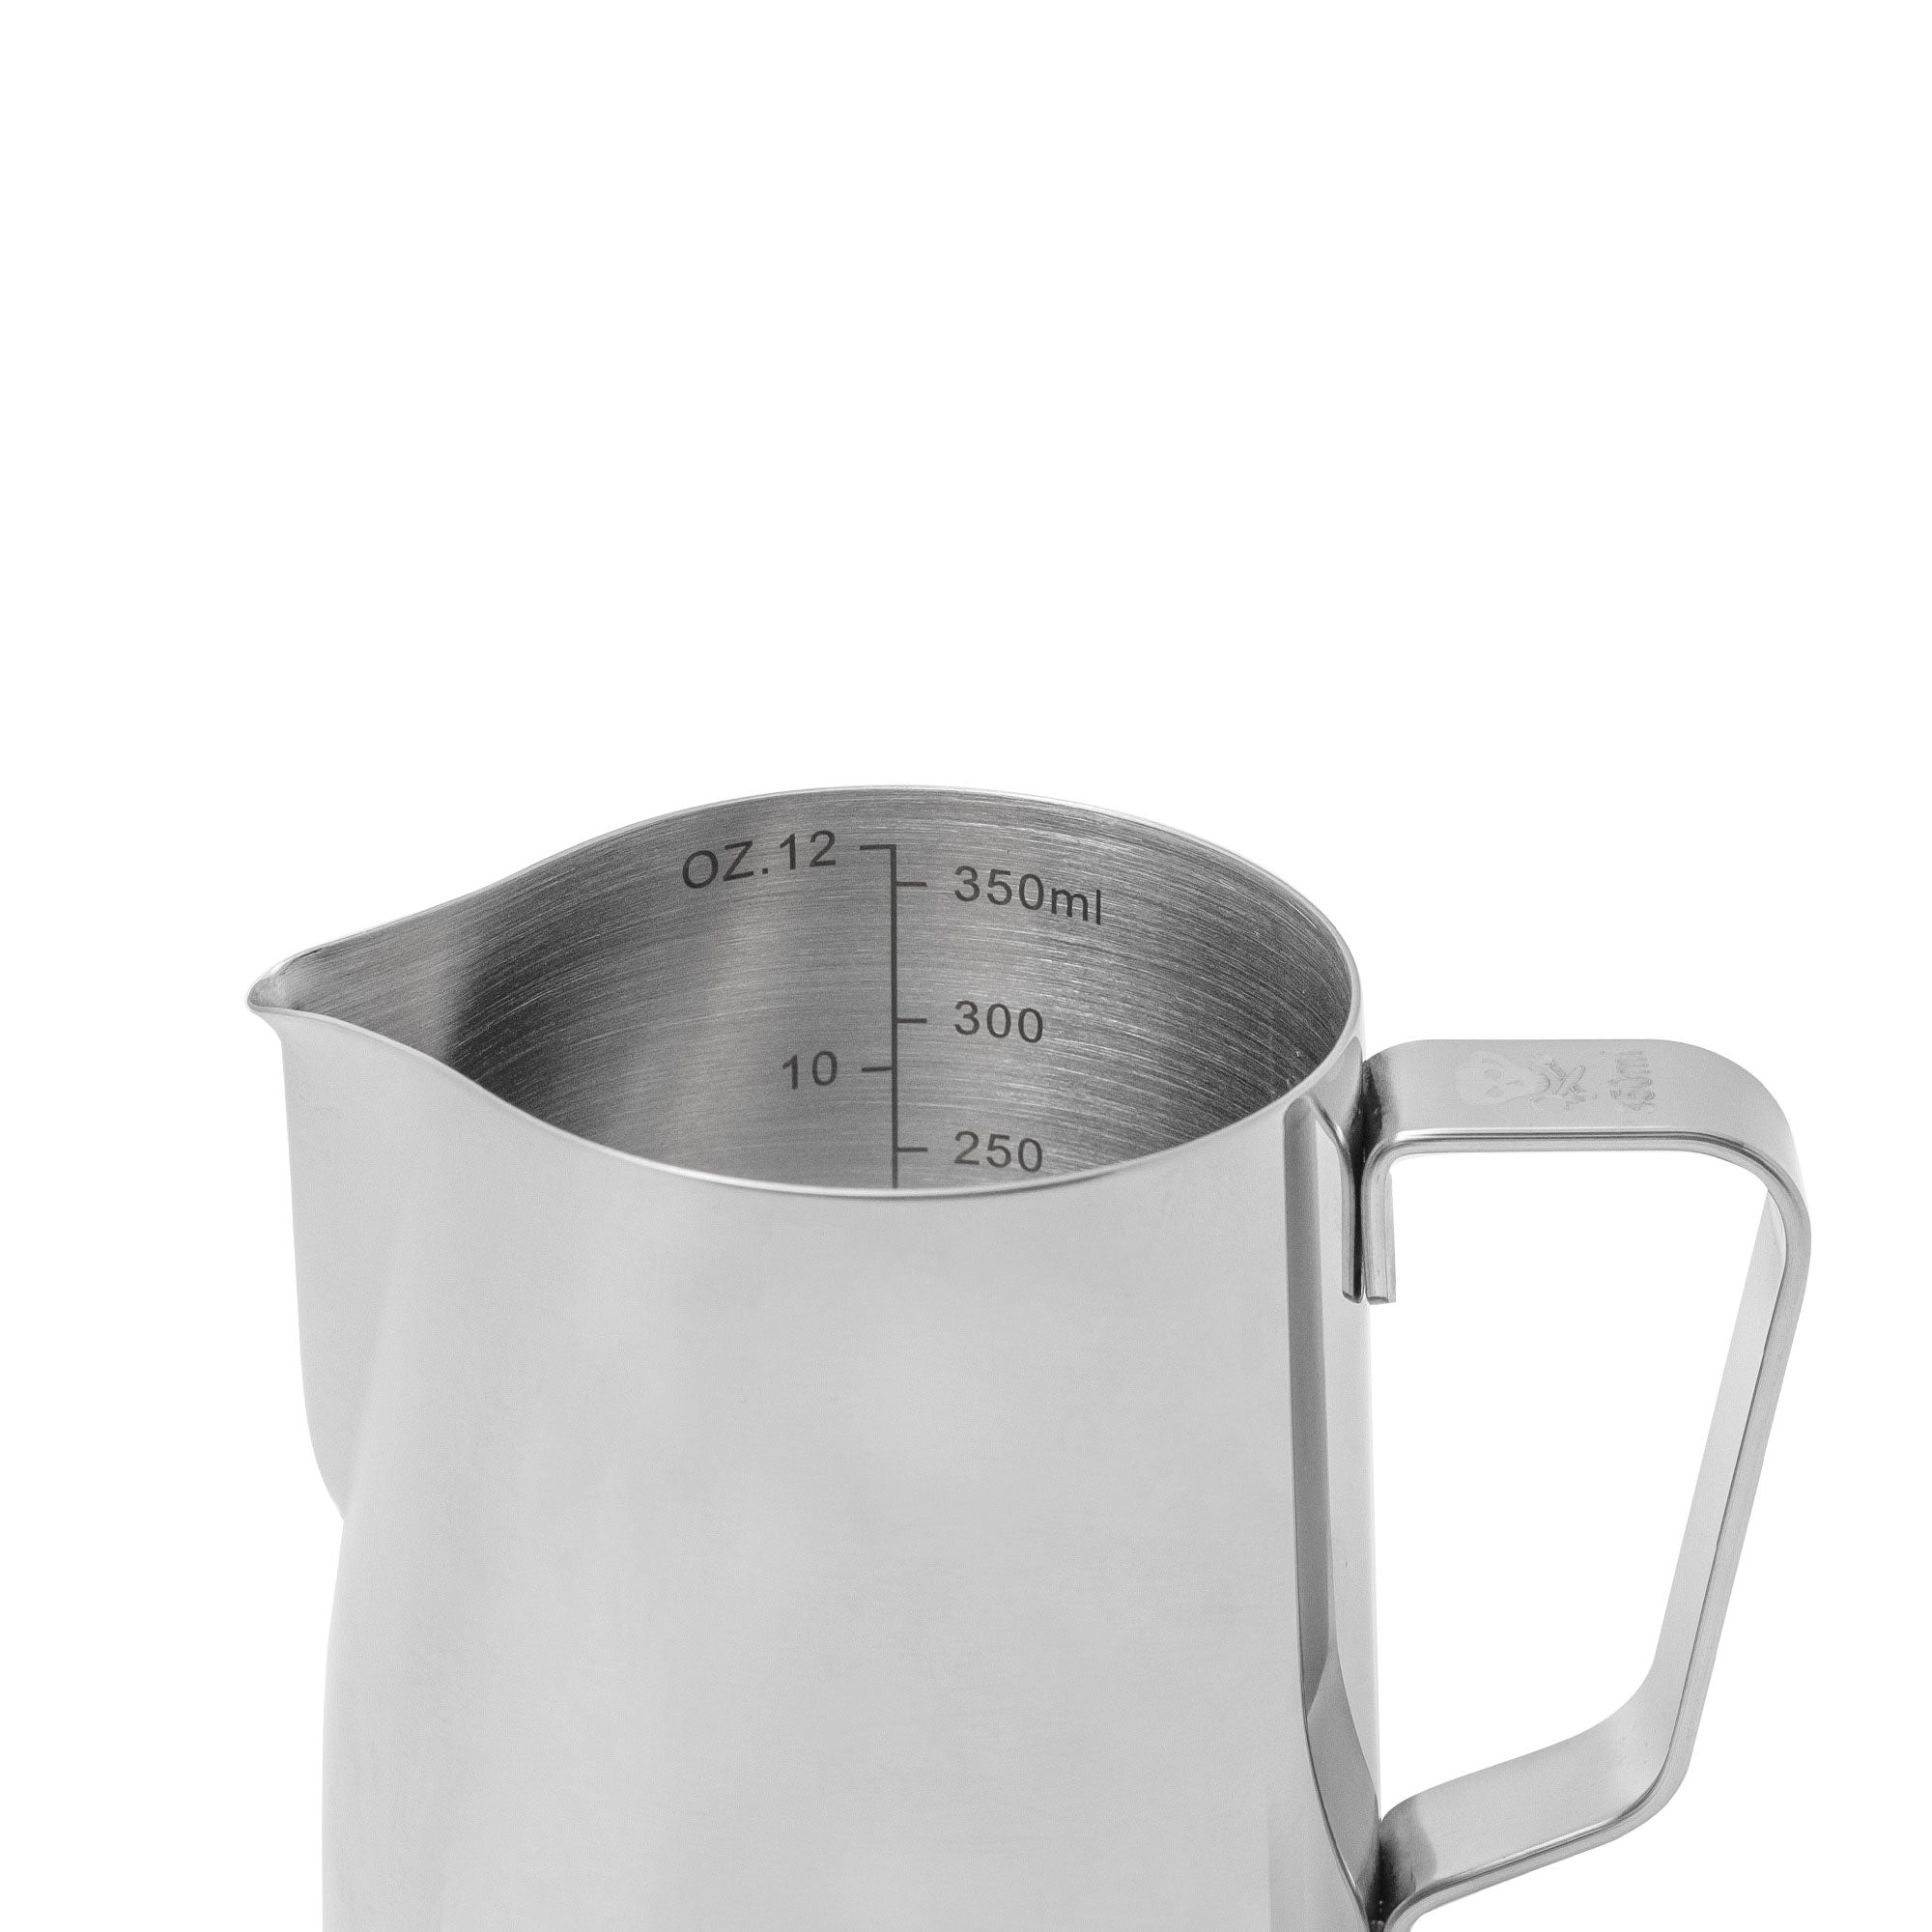 Milk Frothing Pitcher 32oz,Espresso Steaming Pitcher 32oz,Espresso Machine  Accessories,Milk Frother Cup 32oz,Milk Coffee Cappuccino Latte  Art,Stainless Steel Jug - Kitchen Parts America